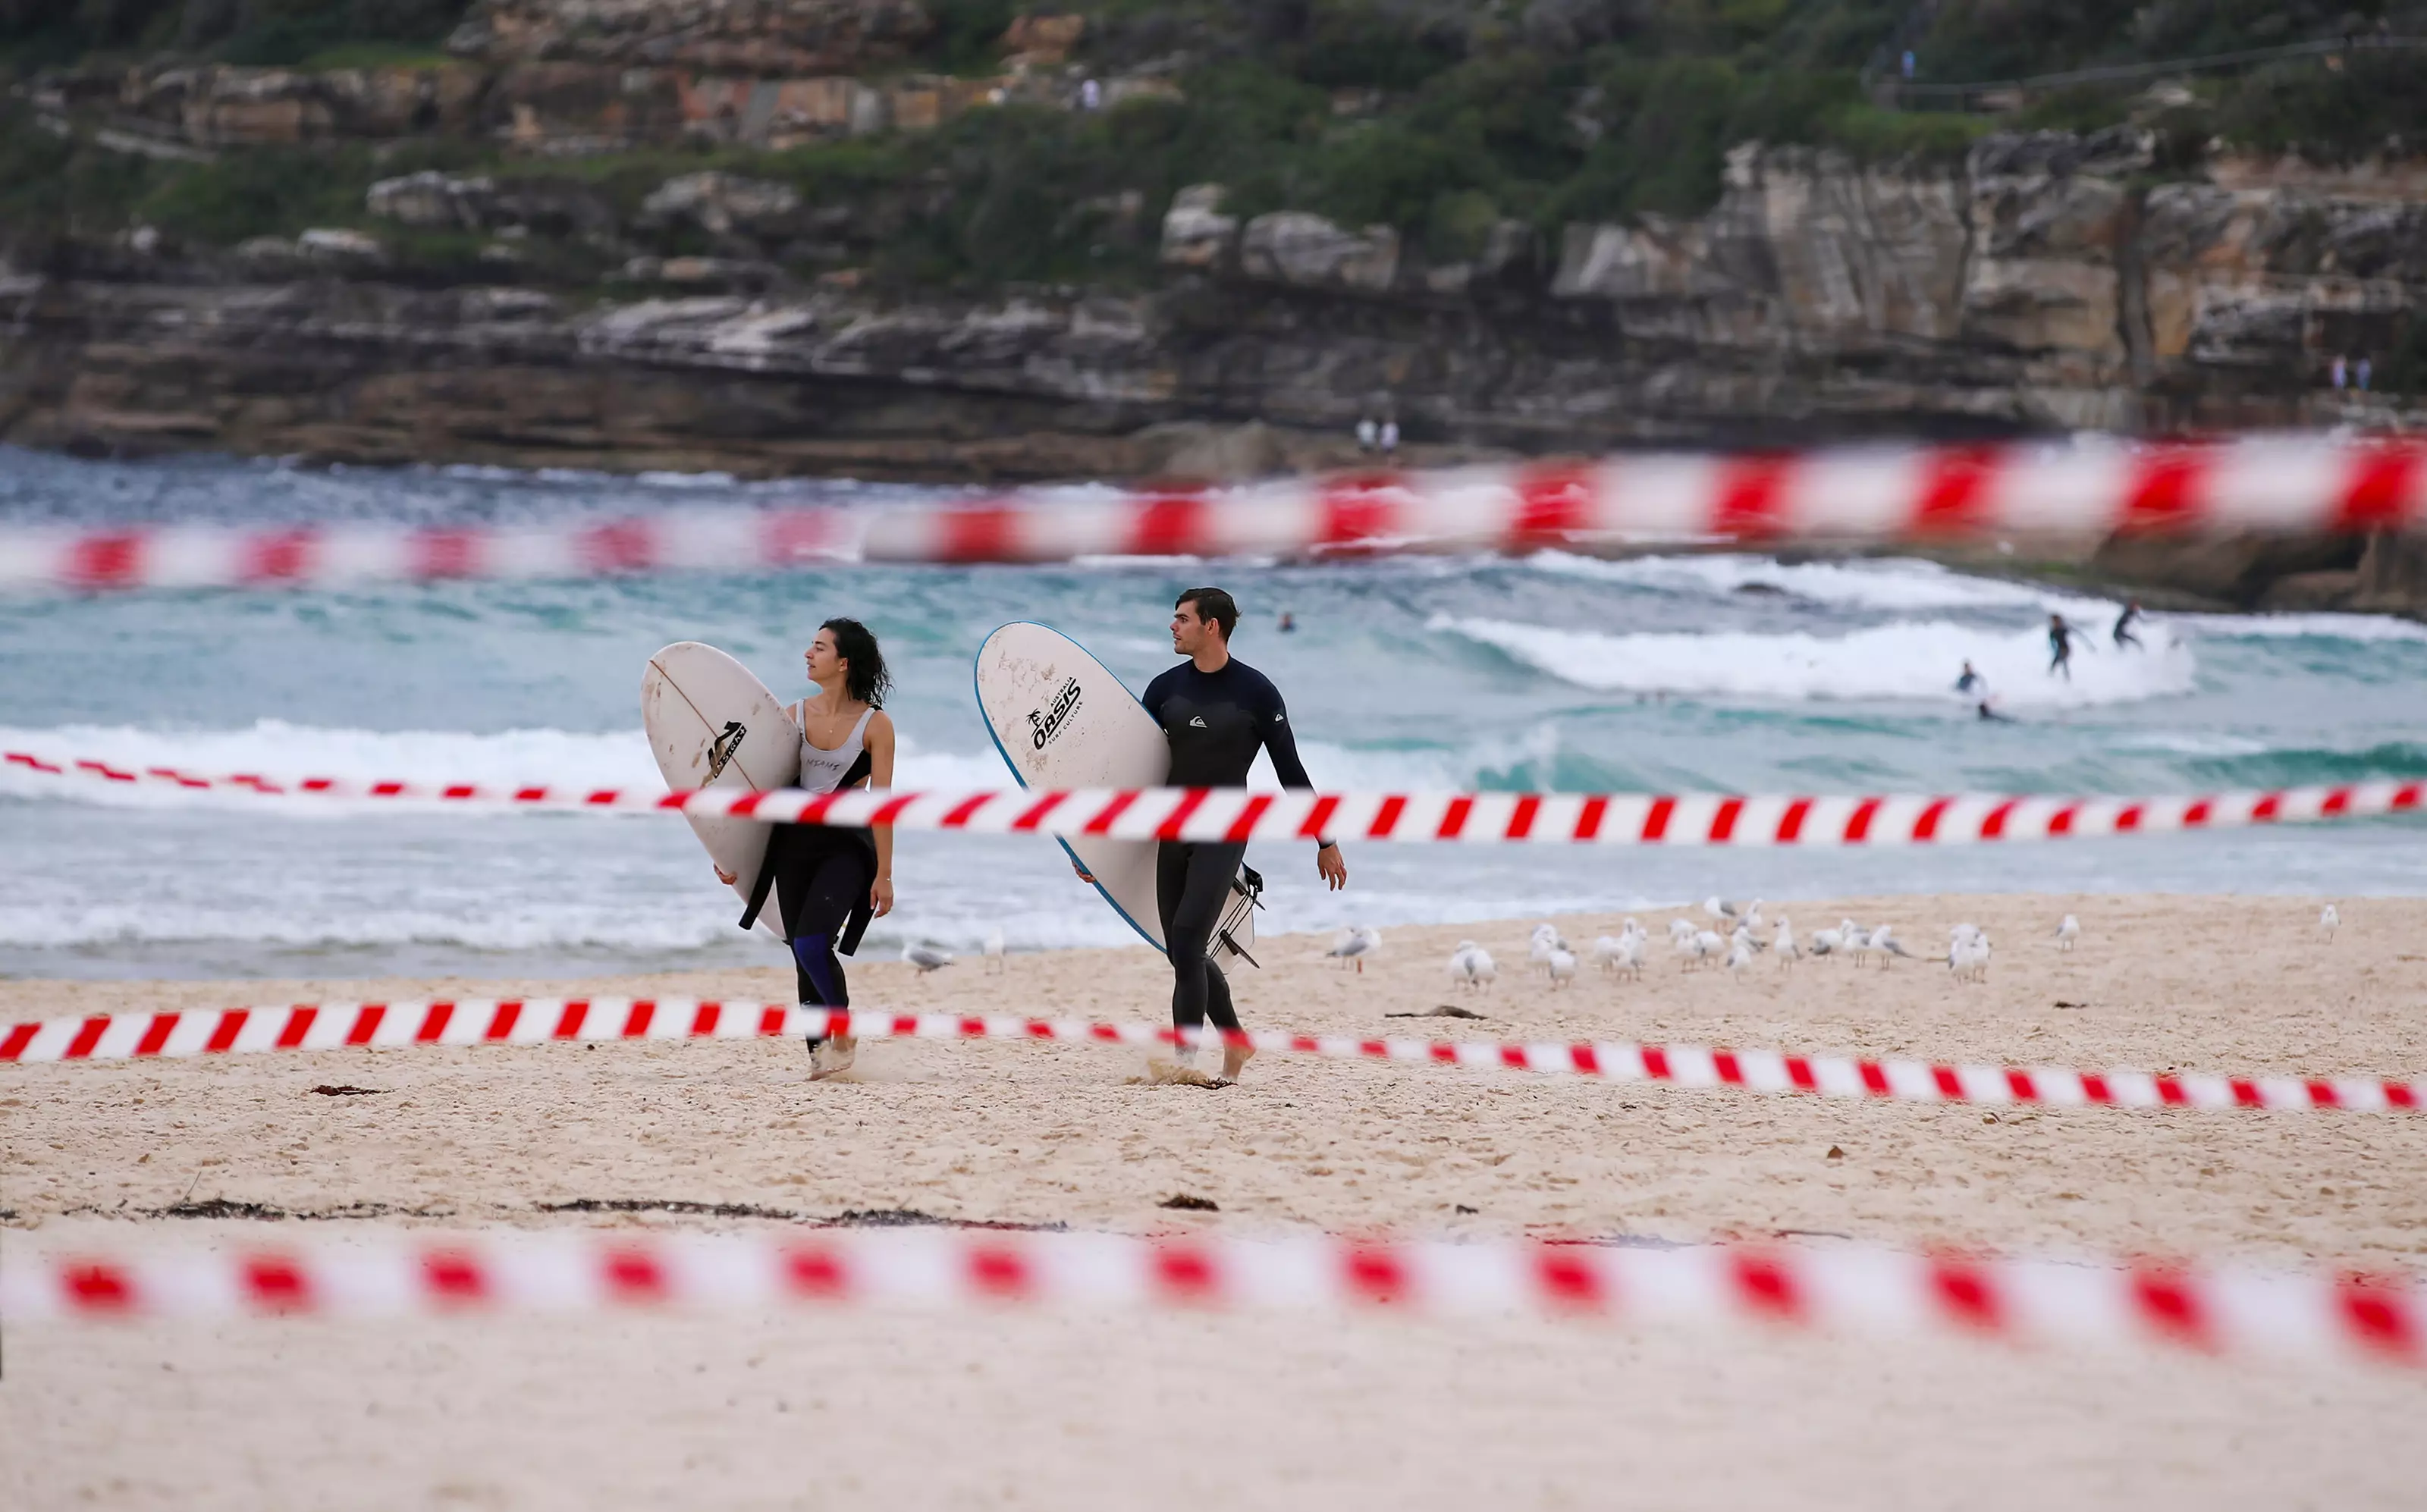 Restrictions on Bondi, Bronte and Tamarama recently were lifted.